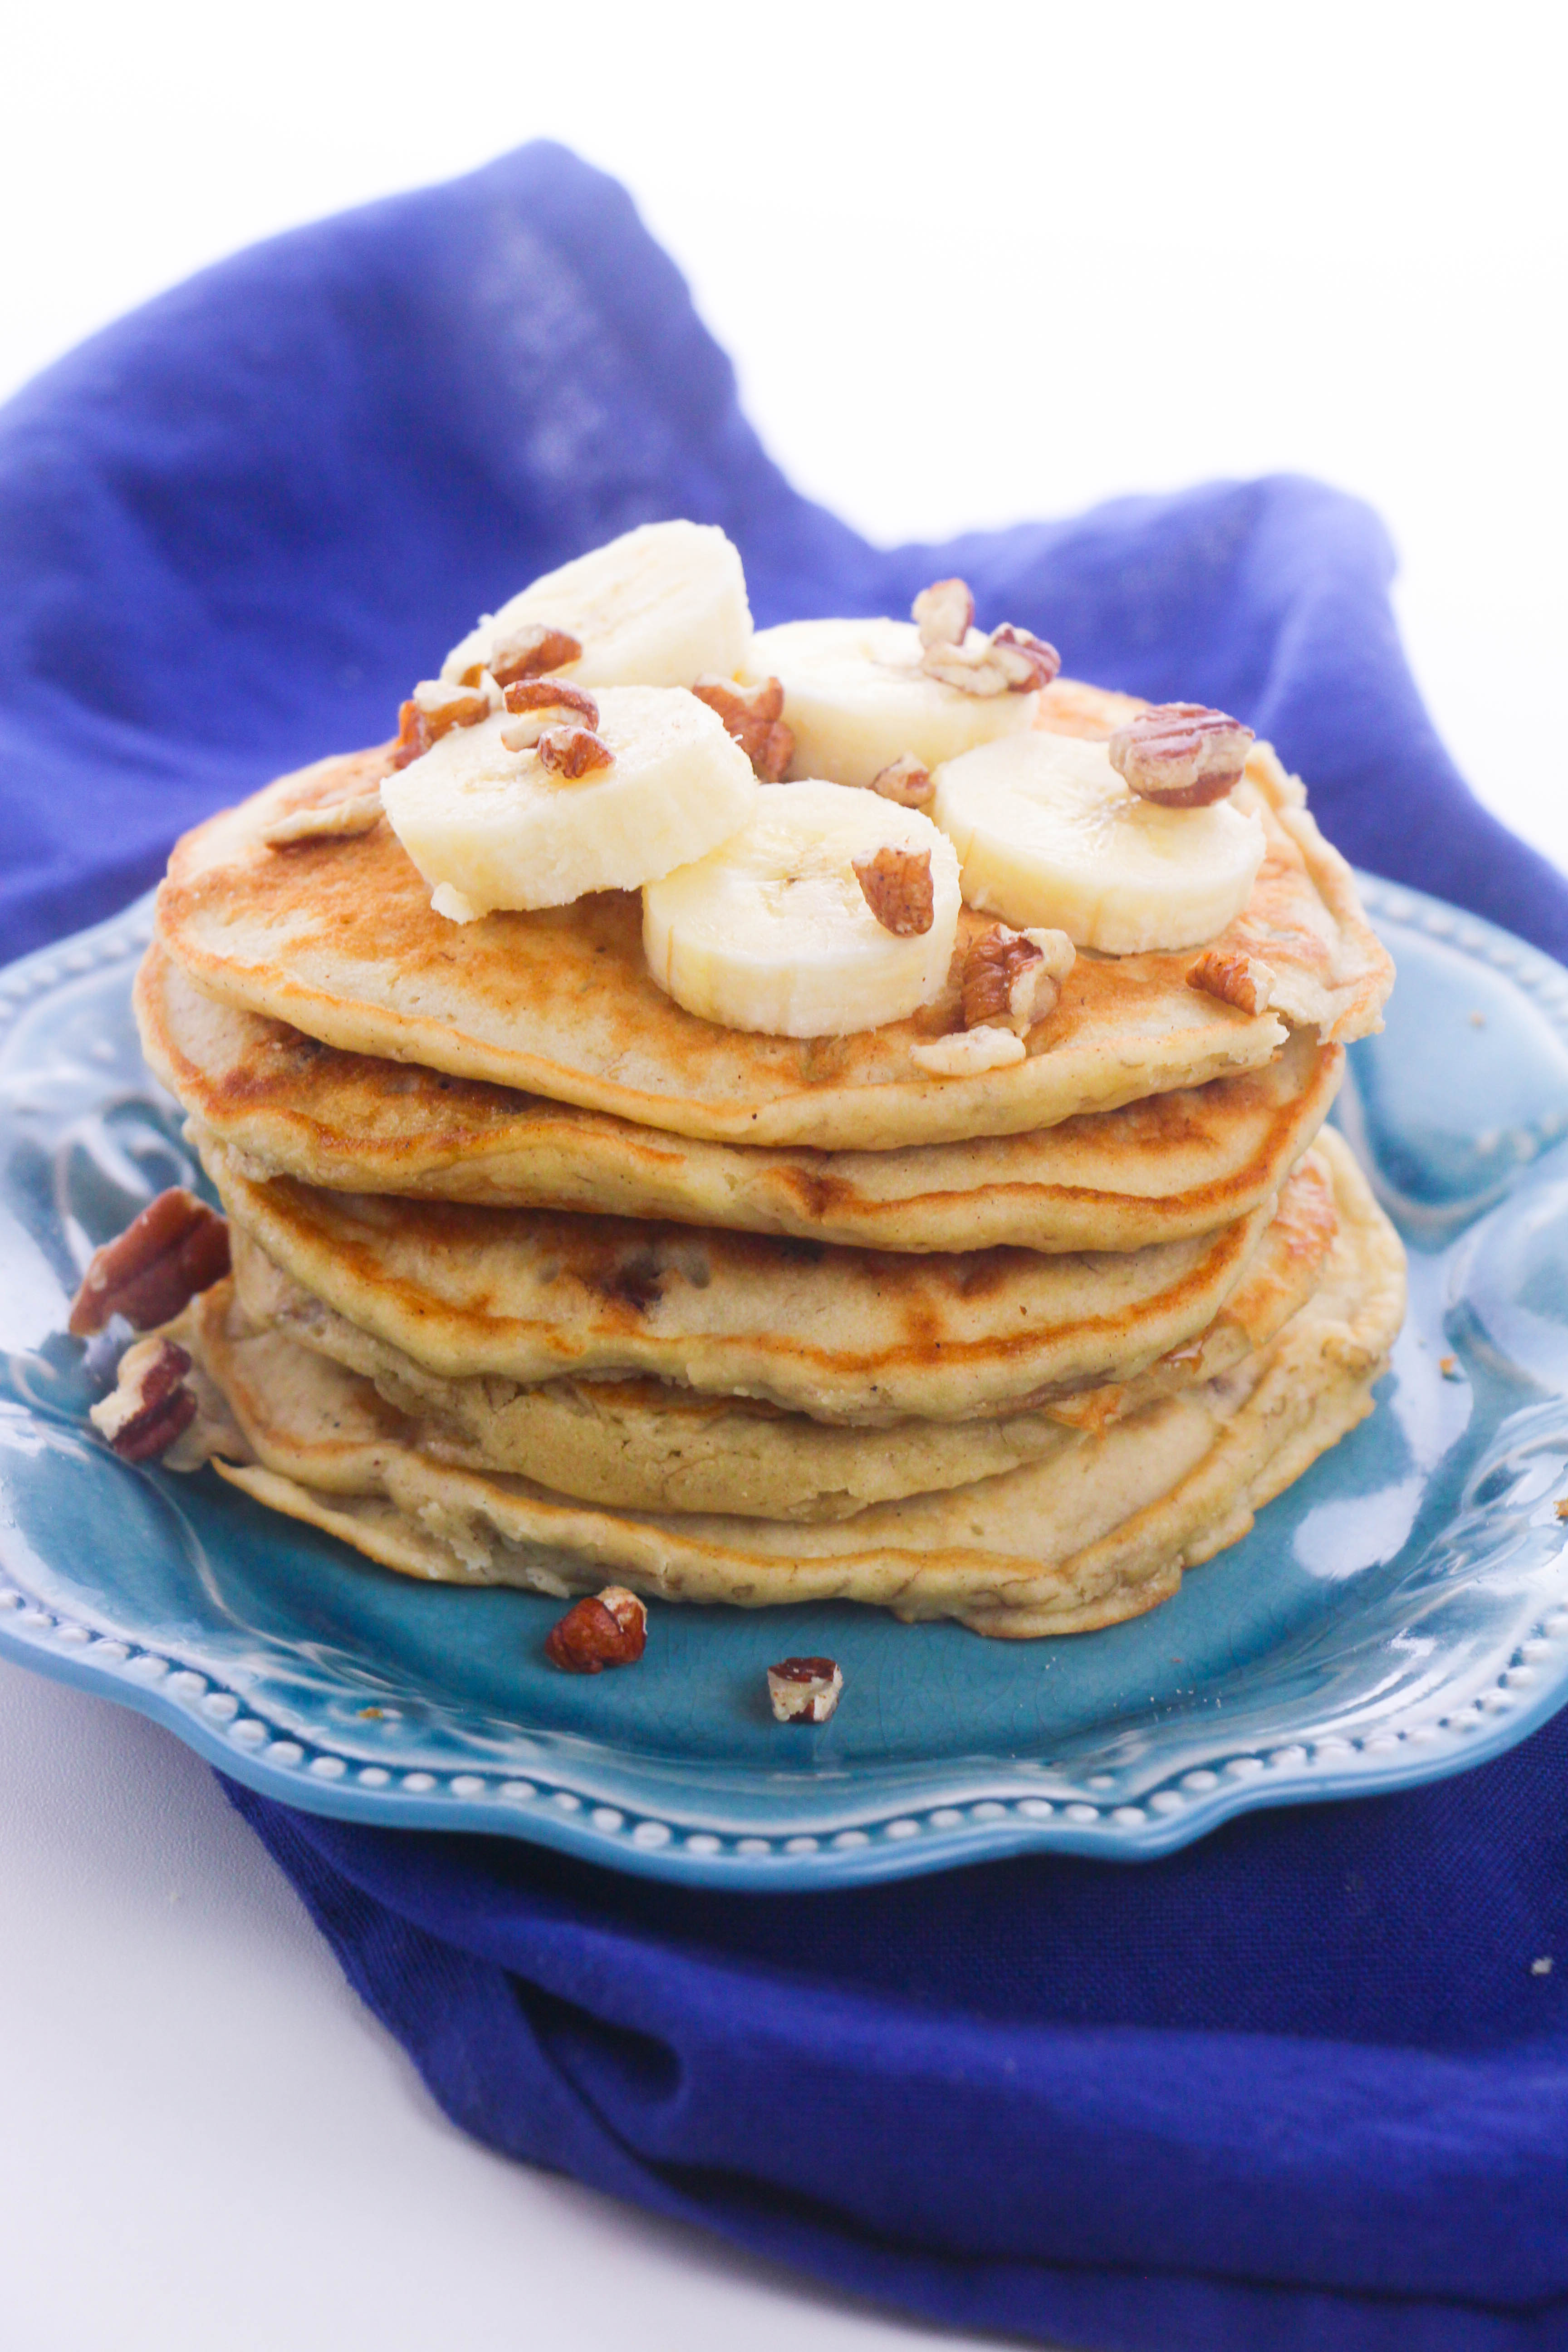 Banana Nut Pancakes: A Fluffy and Nutty Breakfast Delight